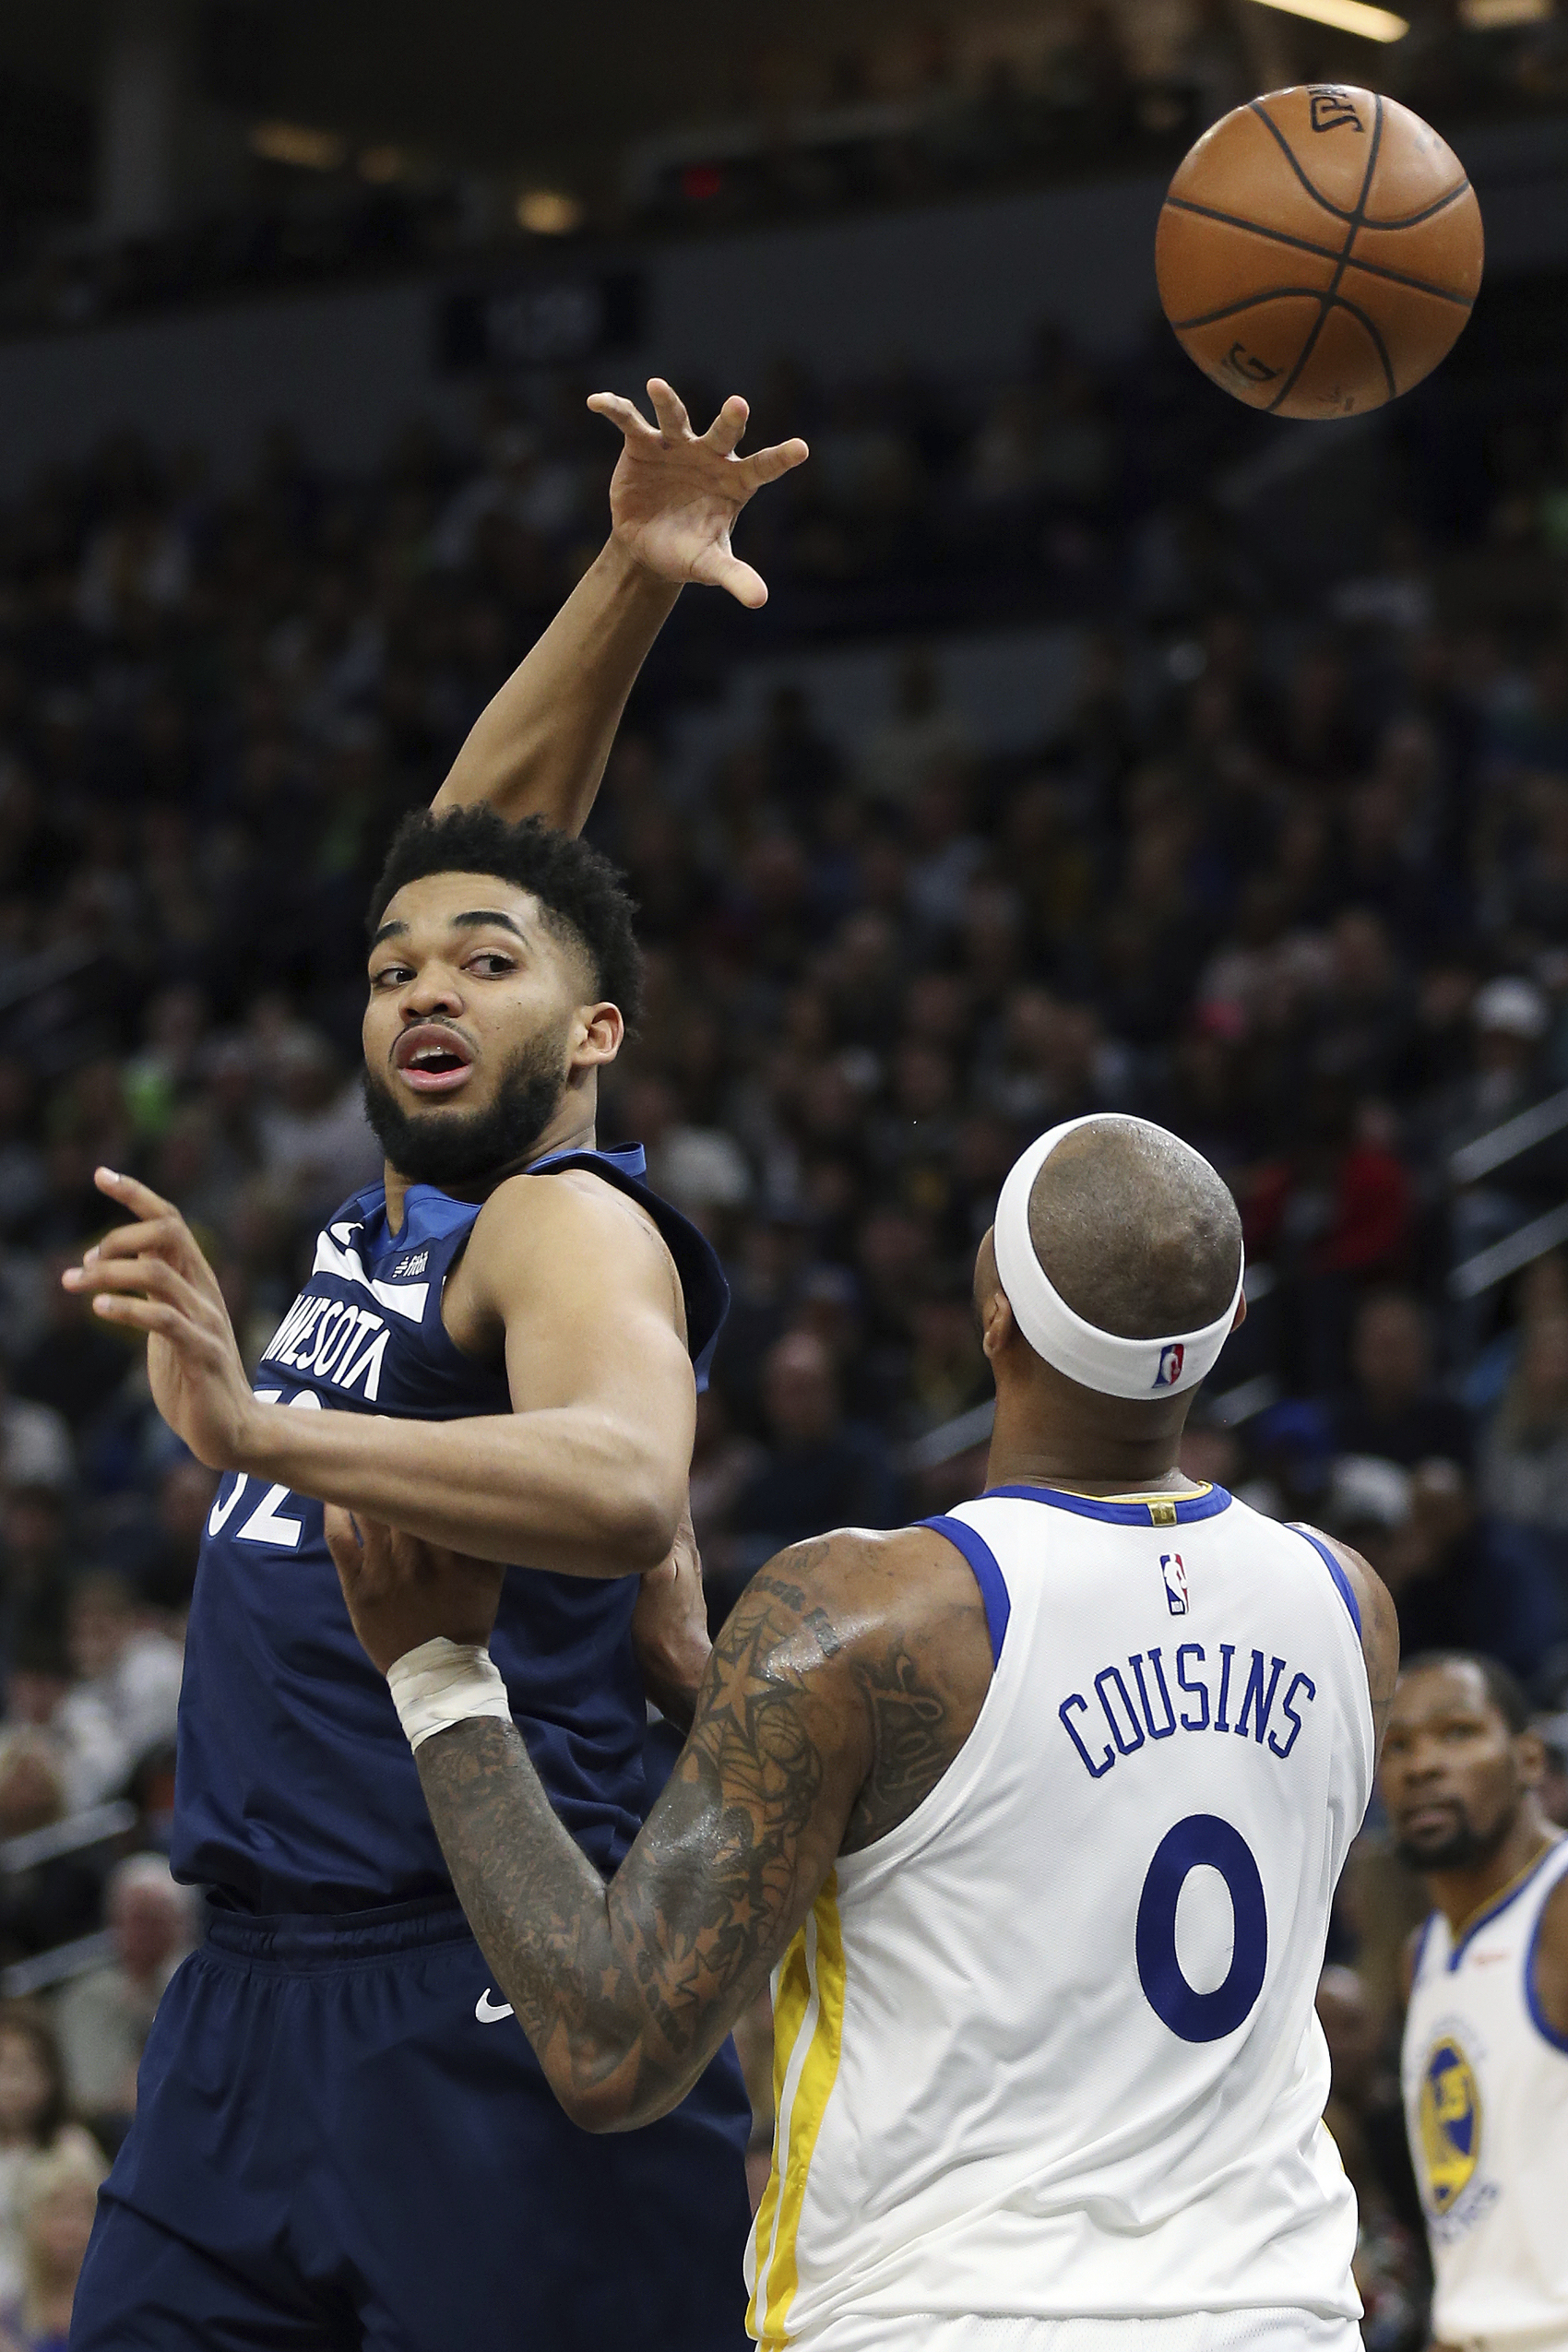 Towns’ free throw lifts Timberwolves over Warriors in OT